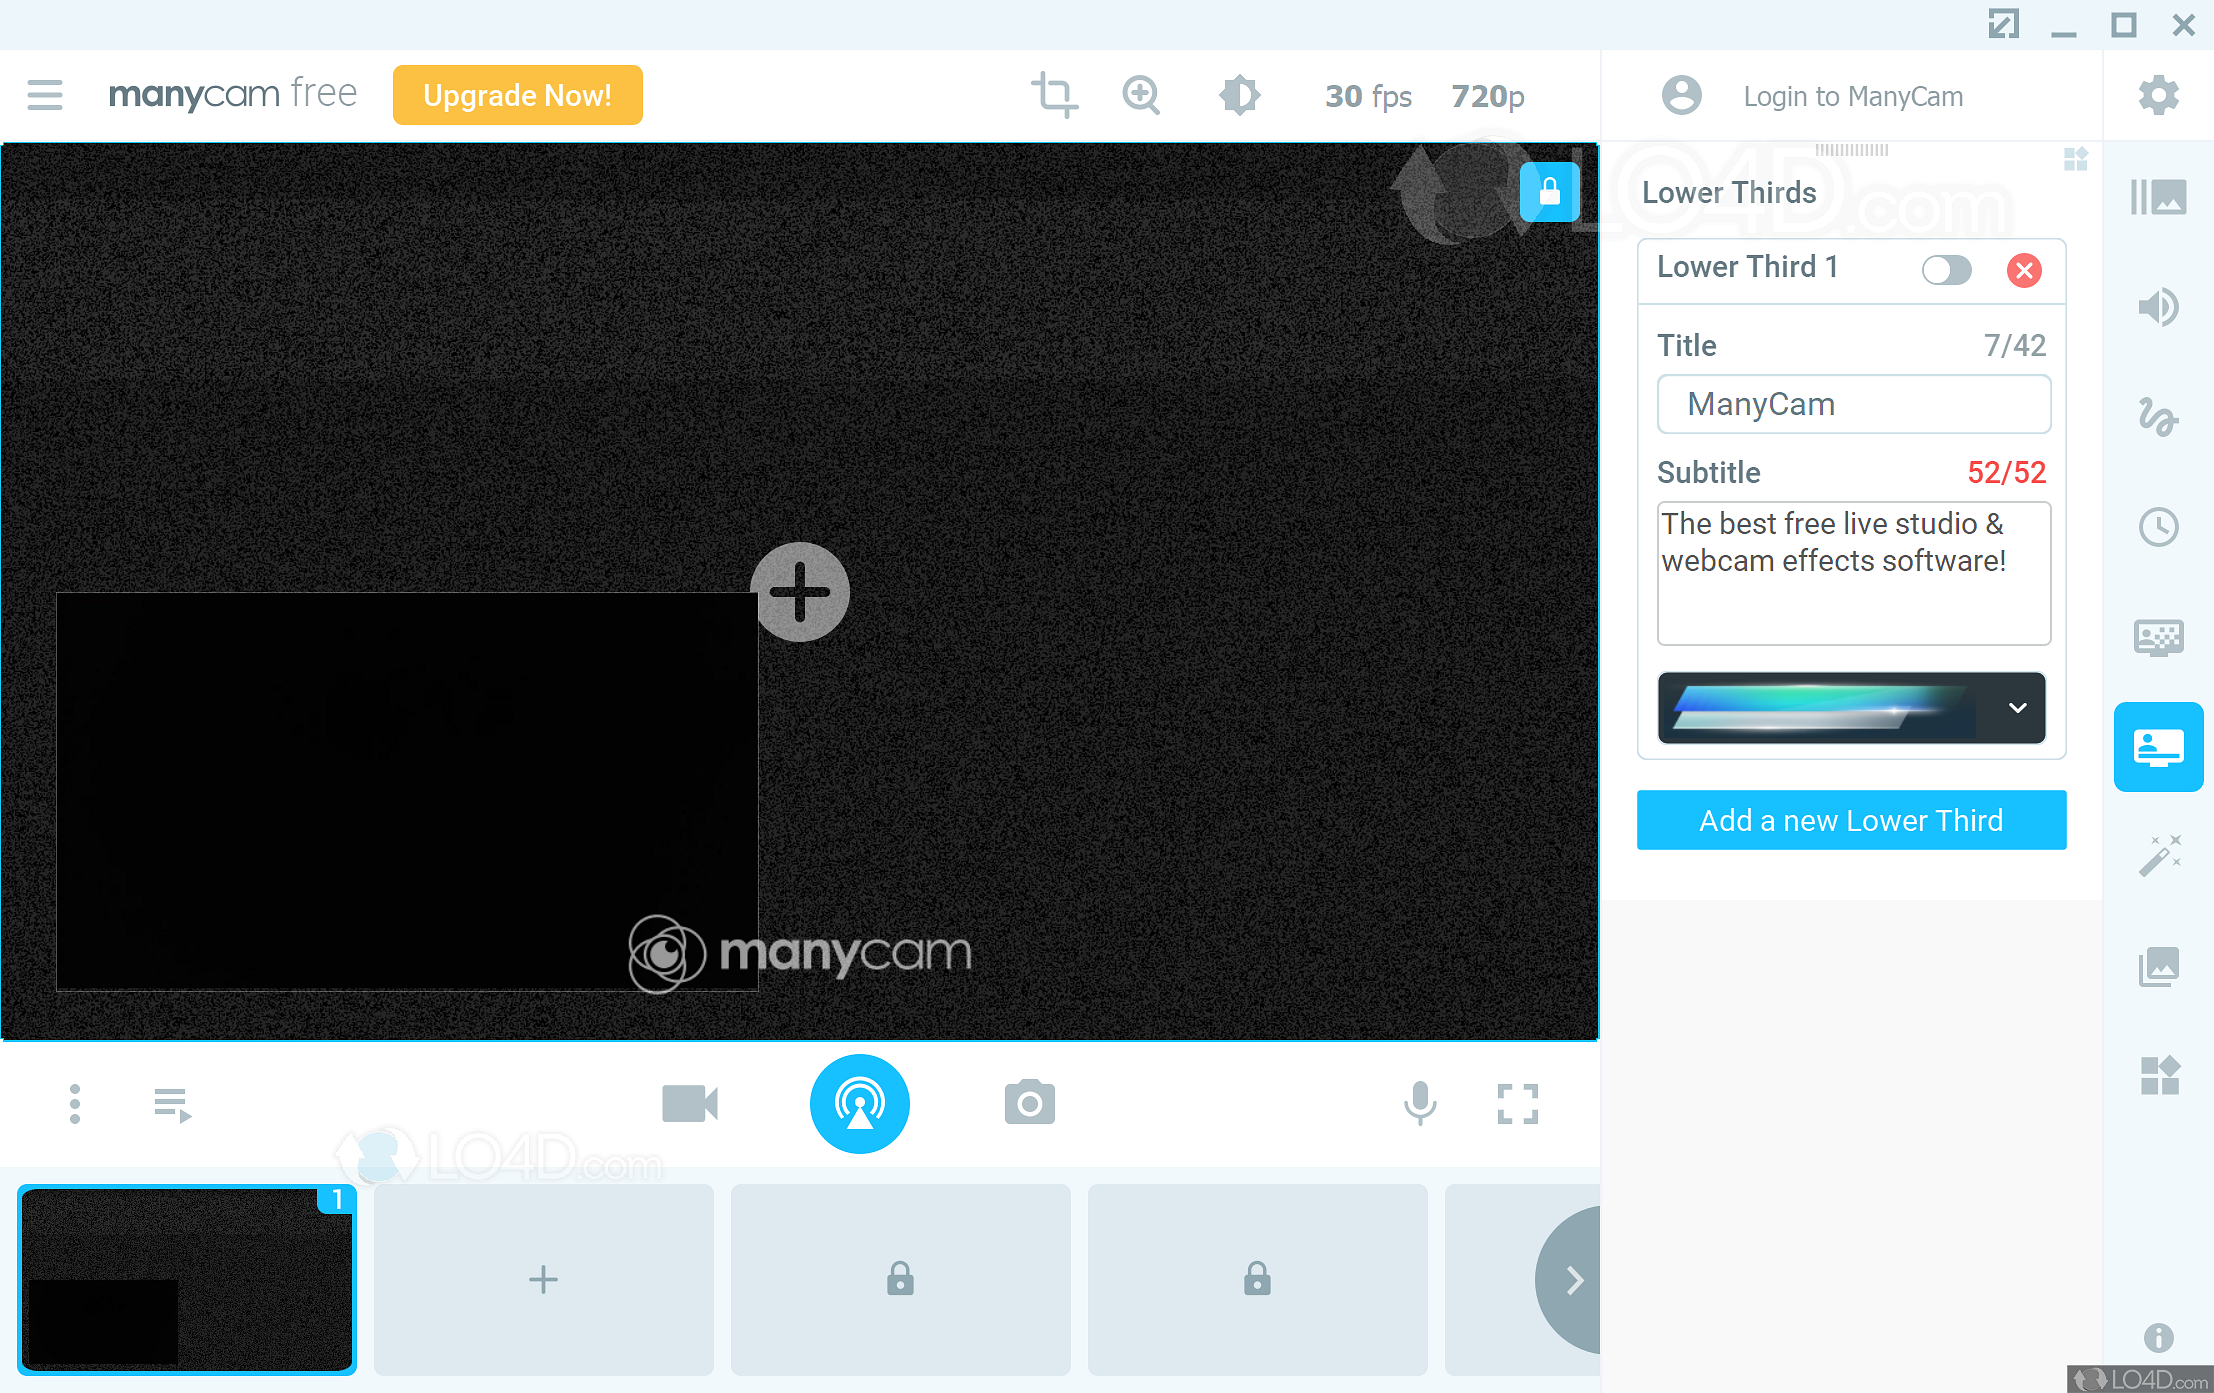 Download Manycam 4.1